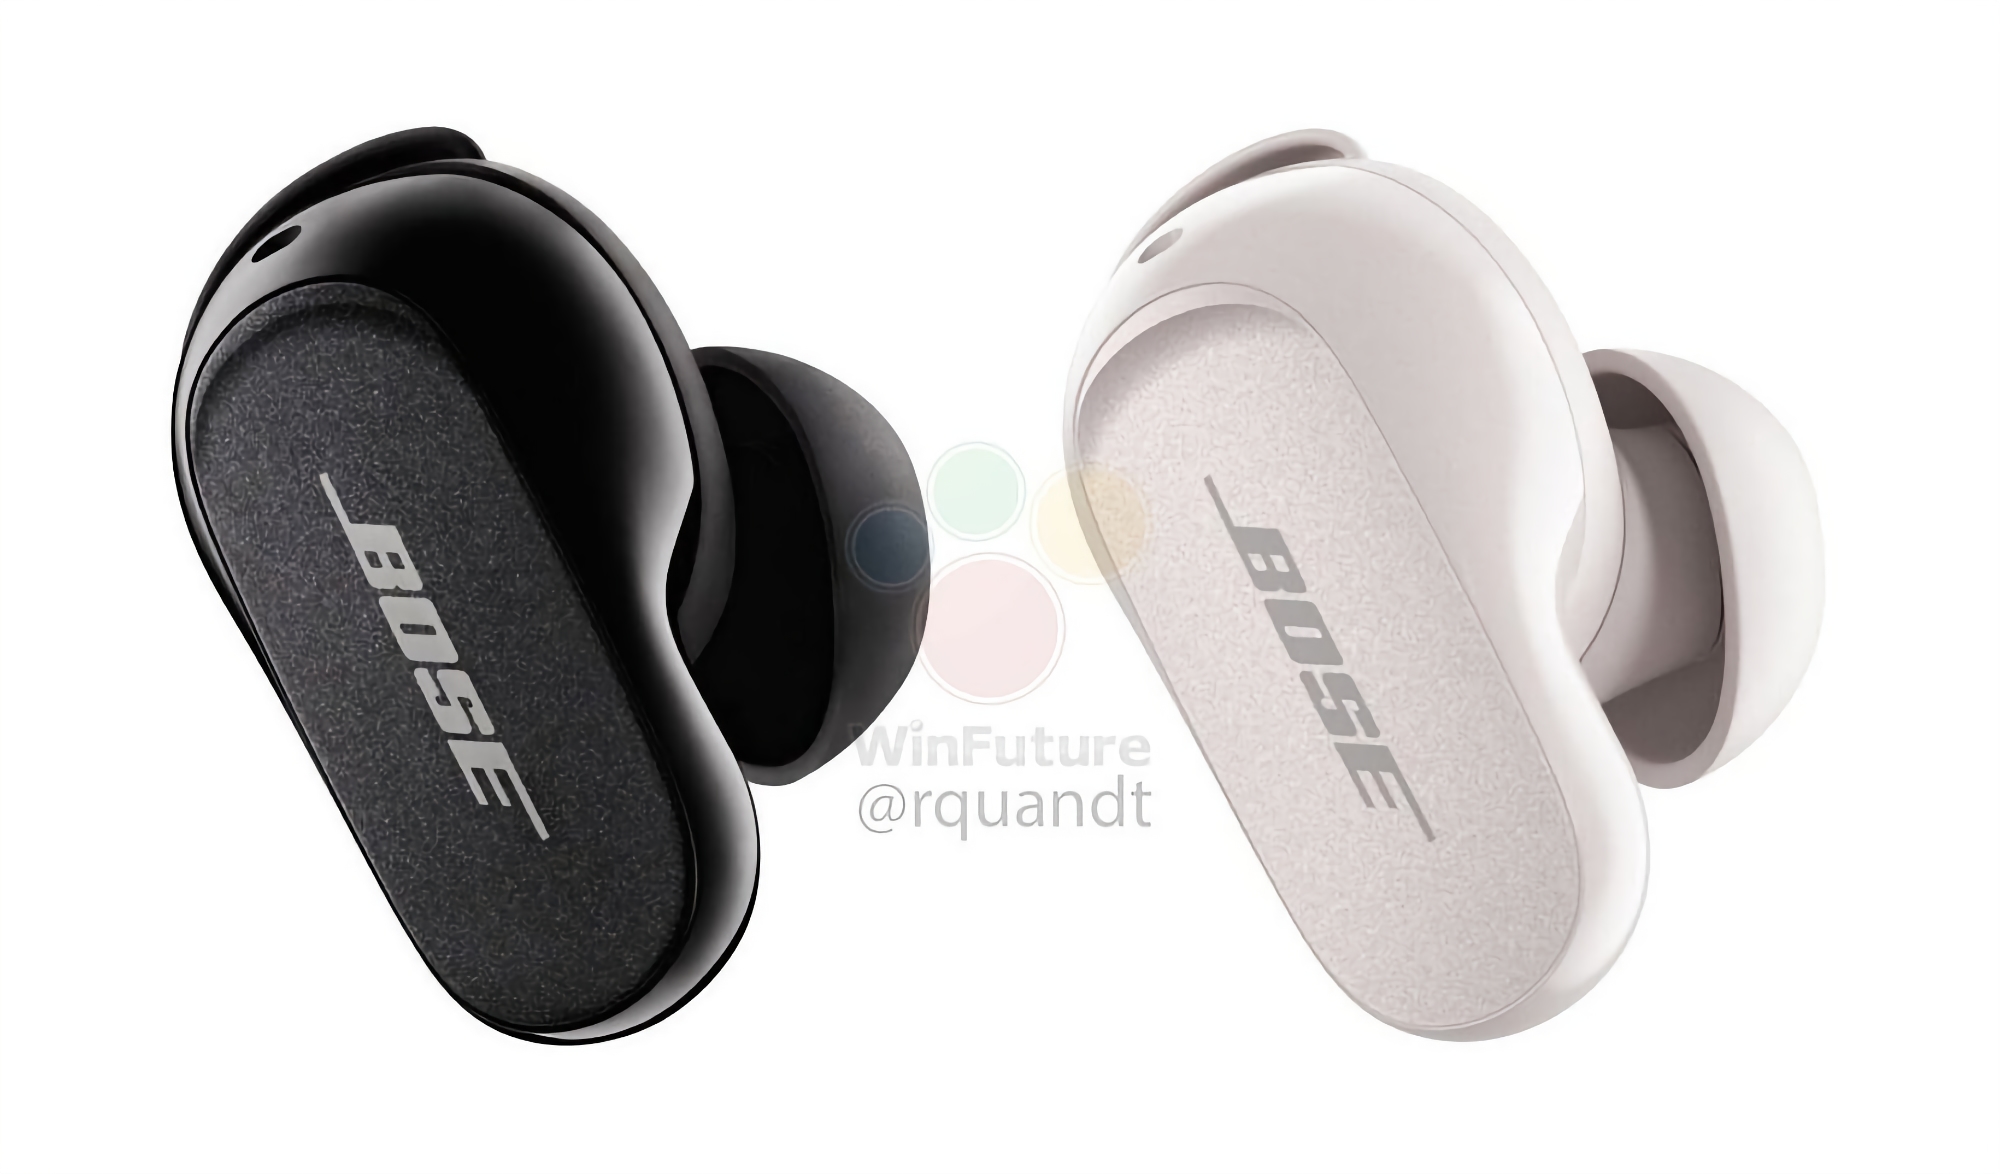 Bose is preparing to release TWS QuietComfort Earbuds II with a new design, ANC and the price $299